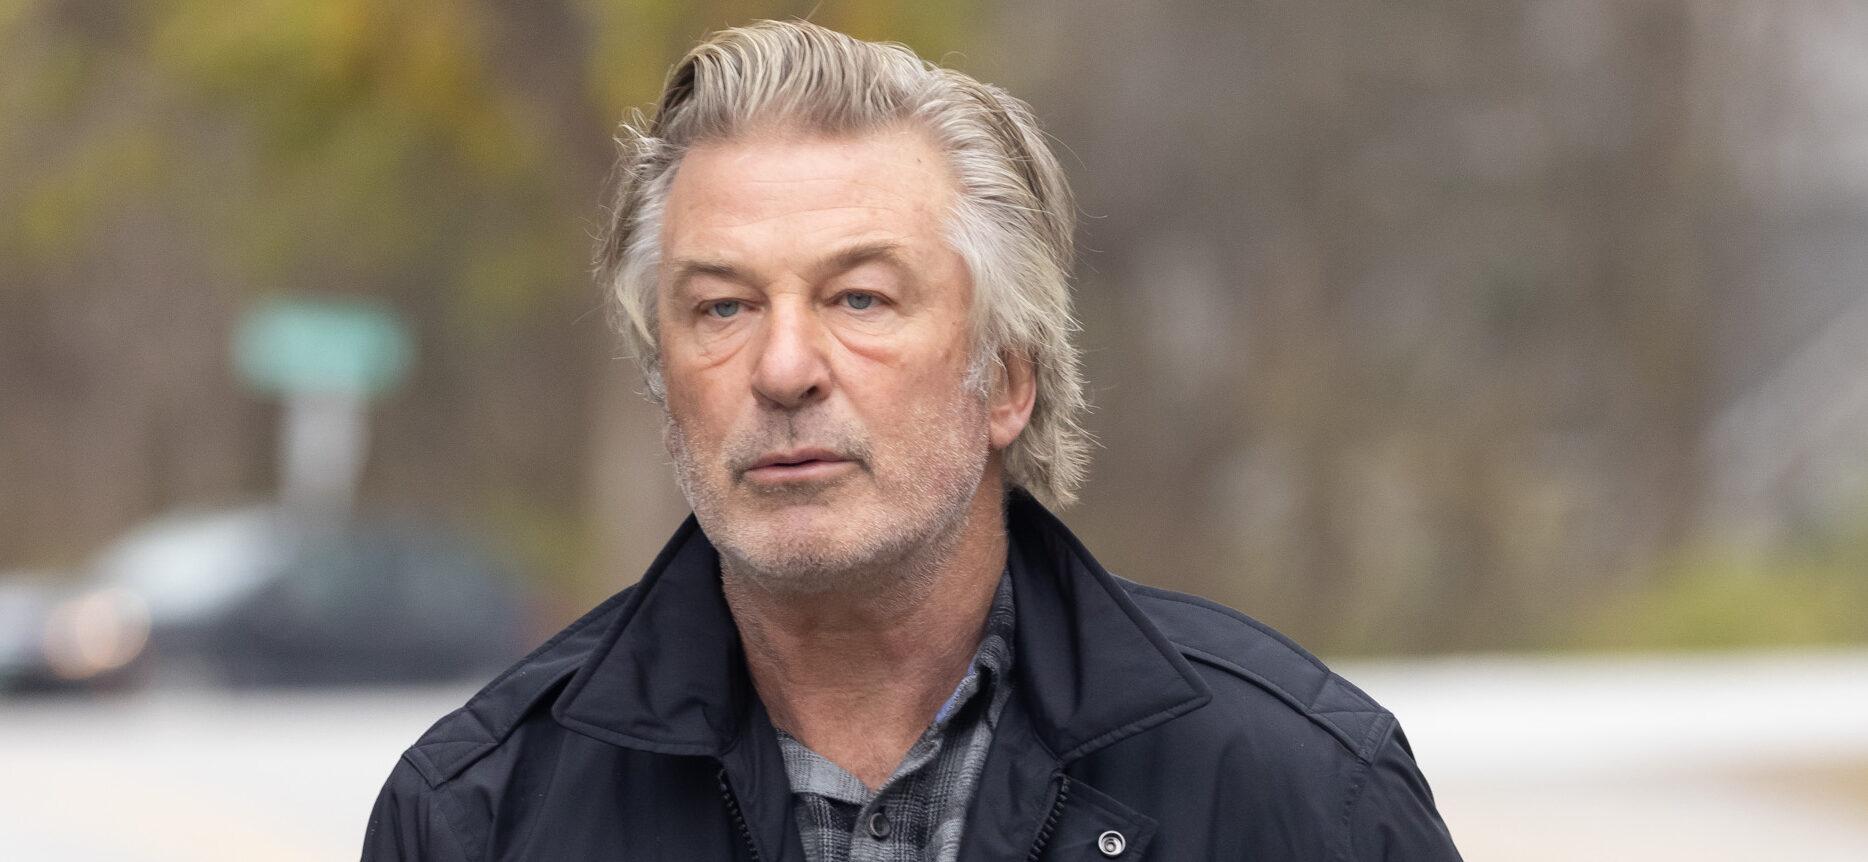 Alec Baldwin Has Viral Run-In With Protester Ahead Of ‘Rust’ Trial